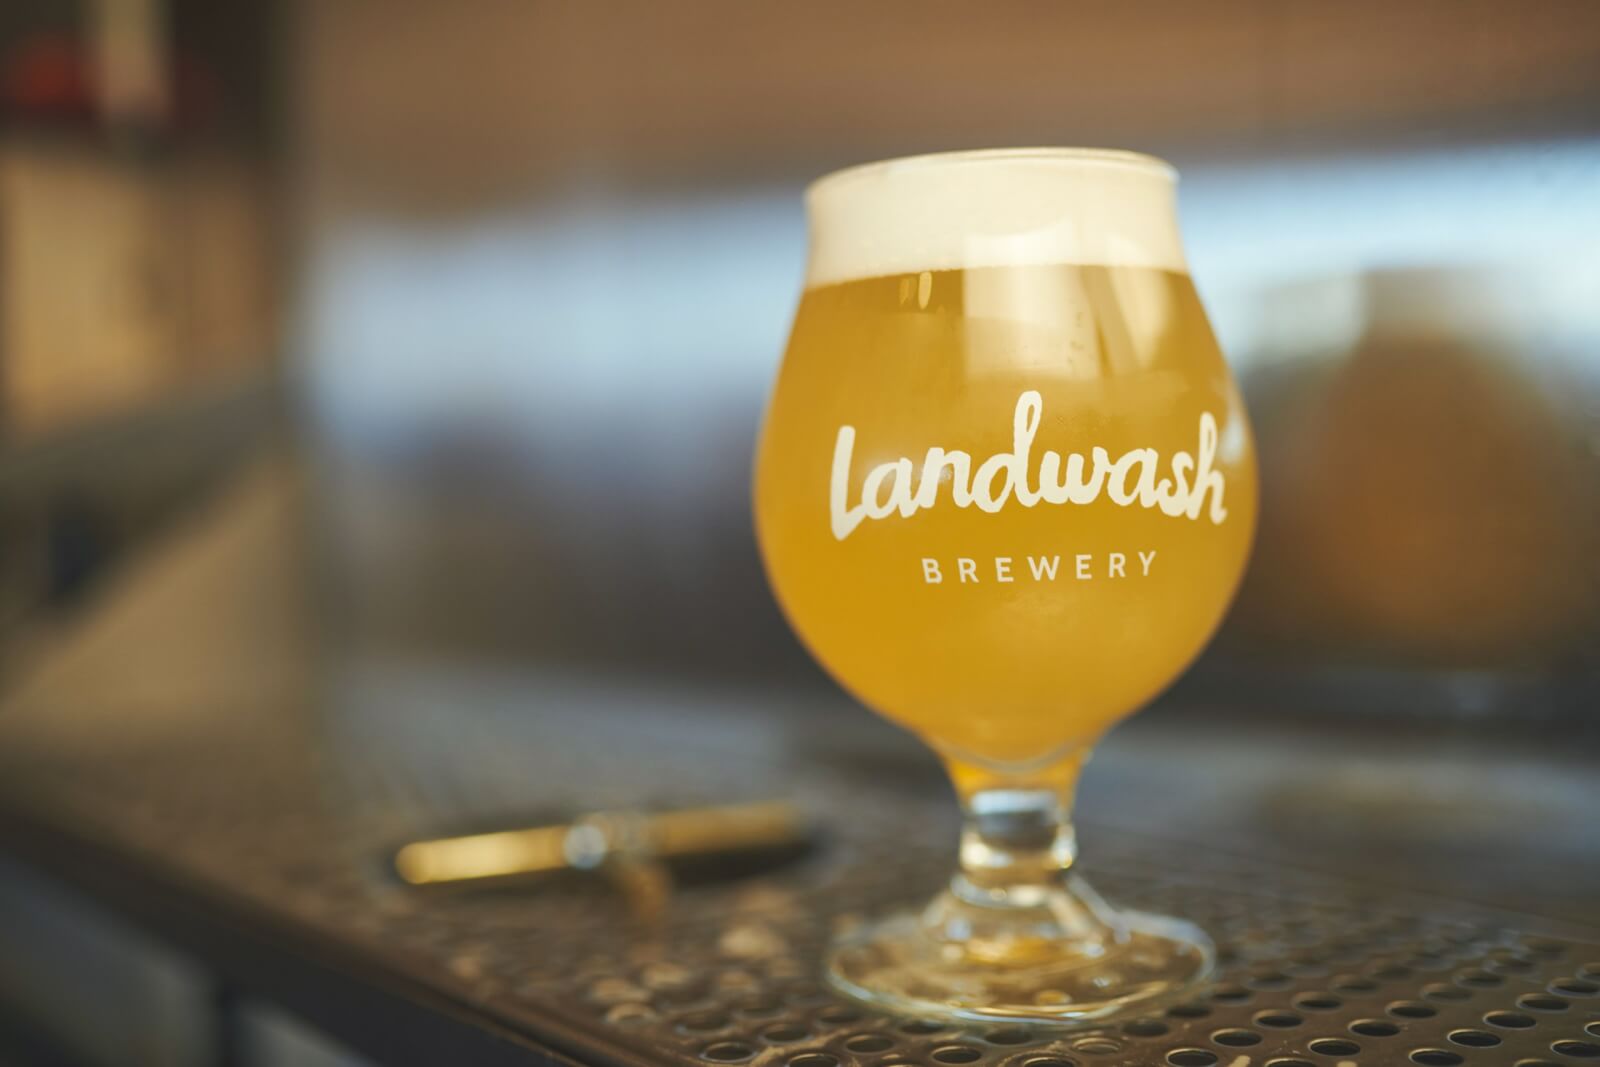 Full glass of Landwash Brewery craft beer sits on the bar top.